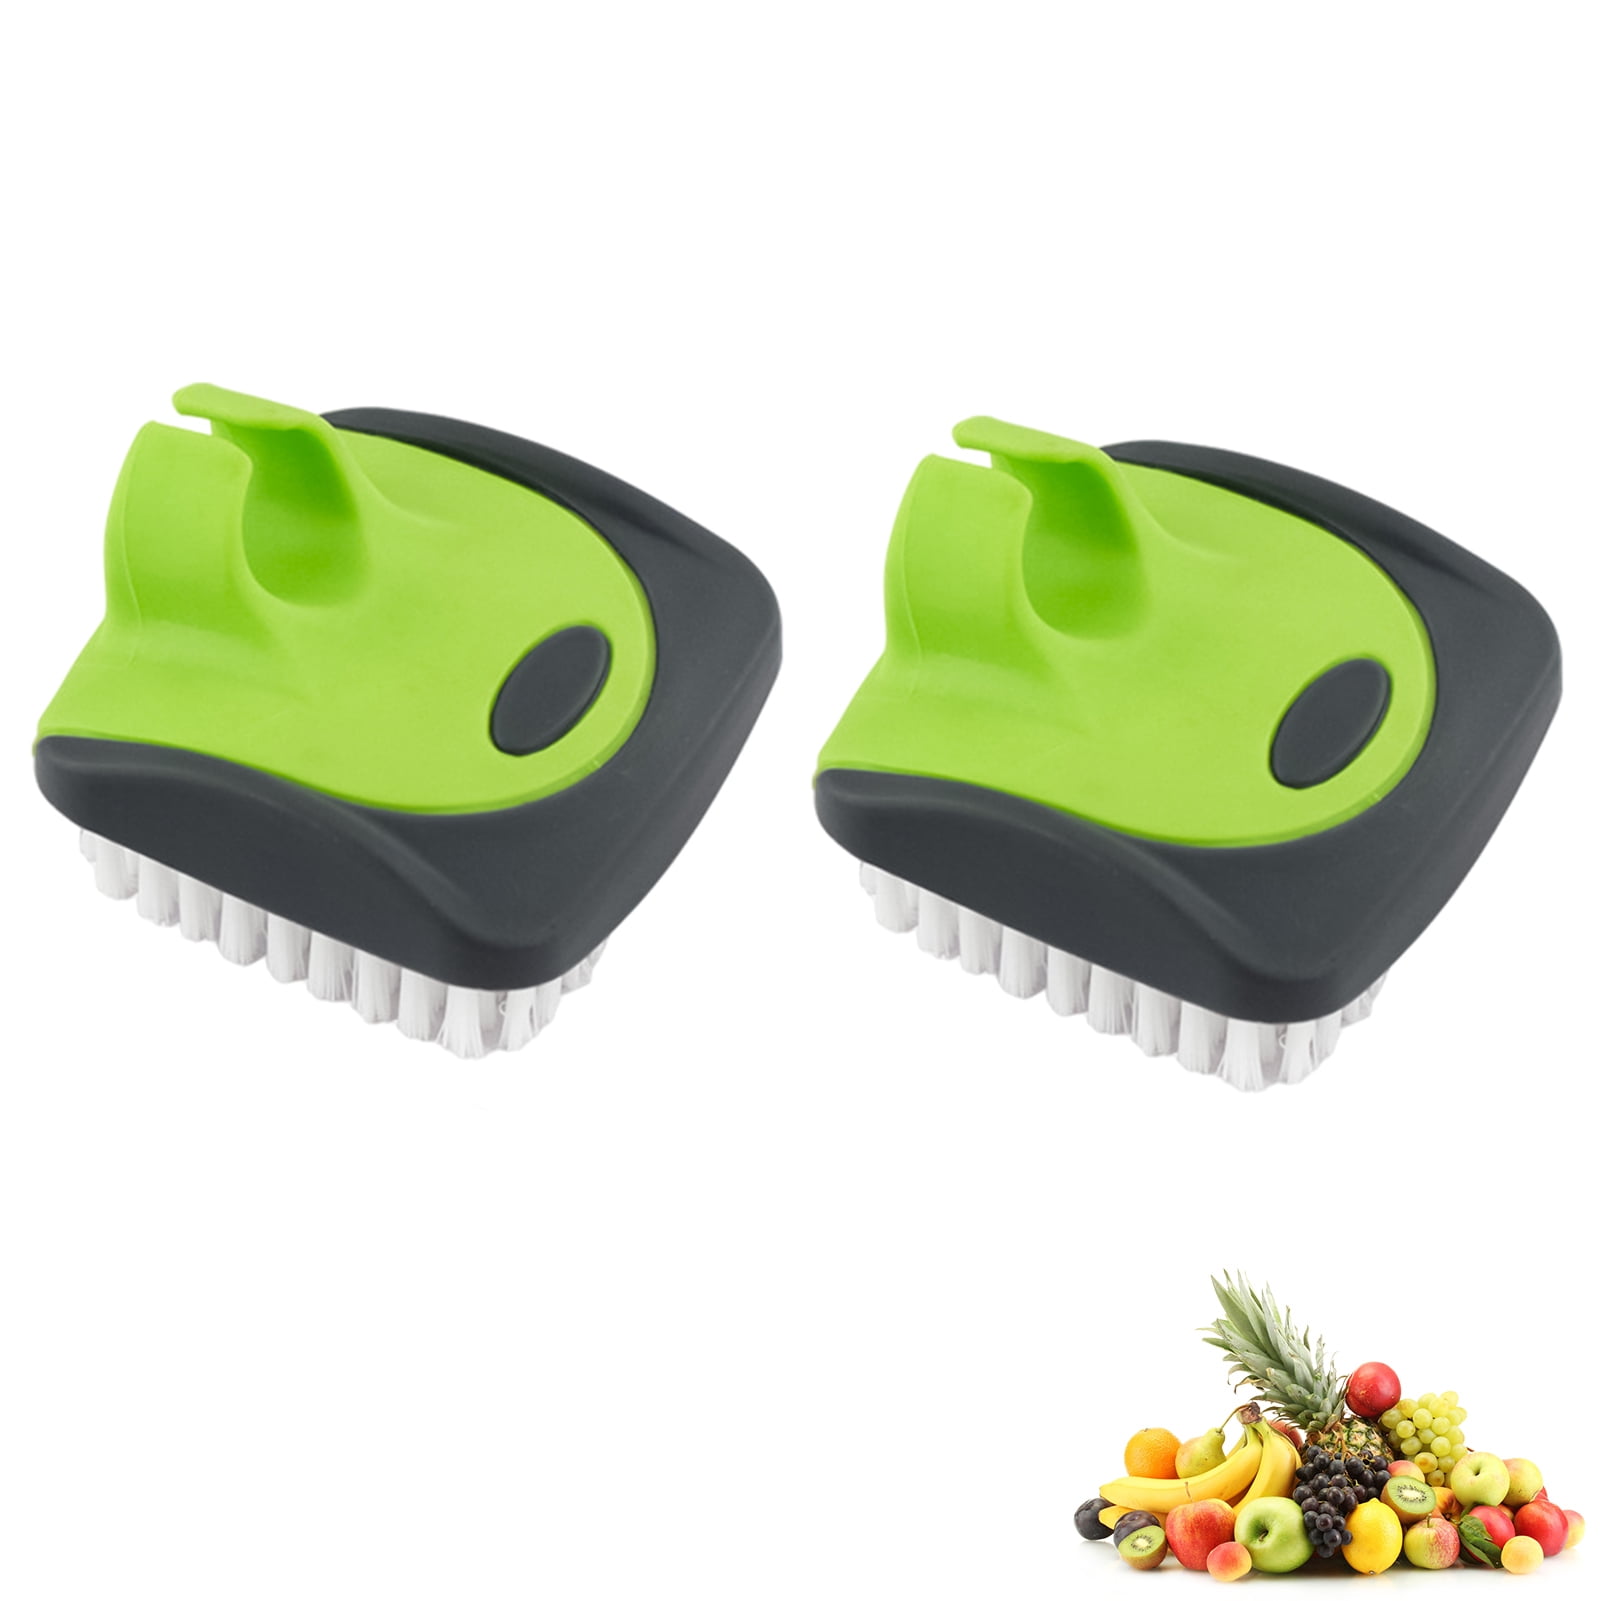 Solacol Soft Bristle Cleaning Brush Household Washable Detergent Washing Brush Press Out Cleaning Brush Soft Bristle Decontamination Shoe Brush